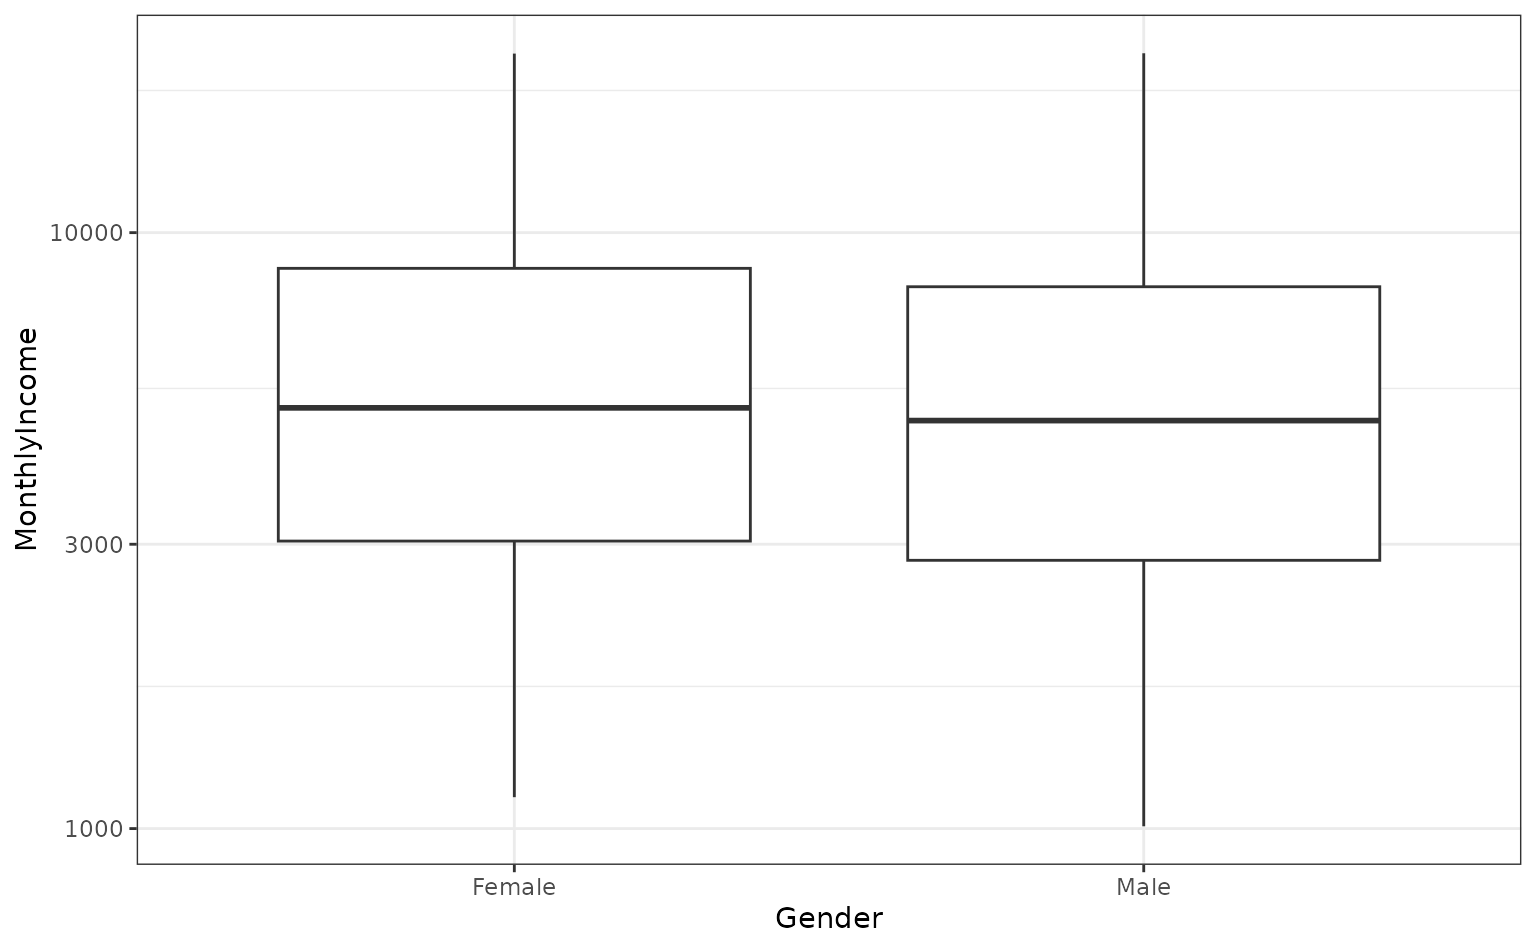 Two boxplots of monthly income separated by gender, showing a slight difference in median but largely overlapping boxes.